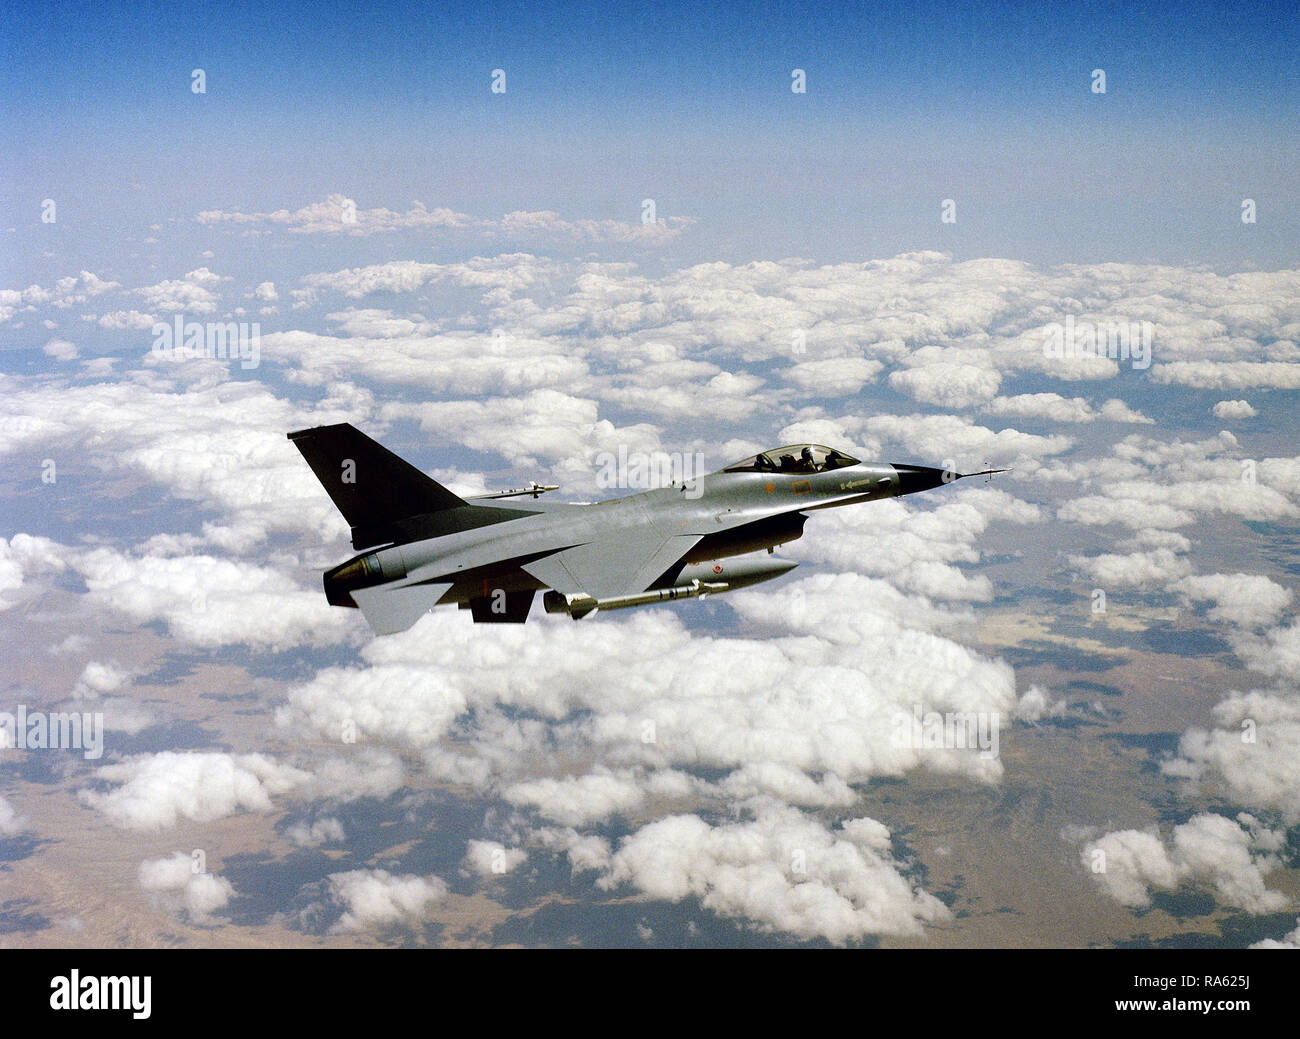 1977 - An air to air right side view of a YF-16 Fighting Falcon aircraft armed with AIM-9 Sidewinder missiles on the wing tips. Stock Photo